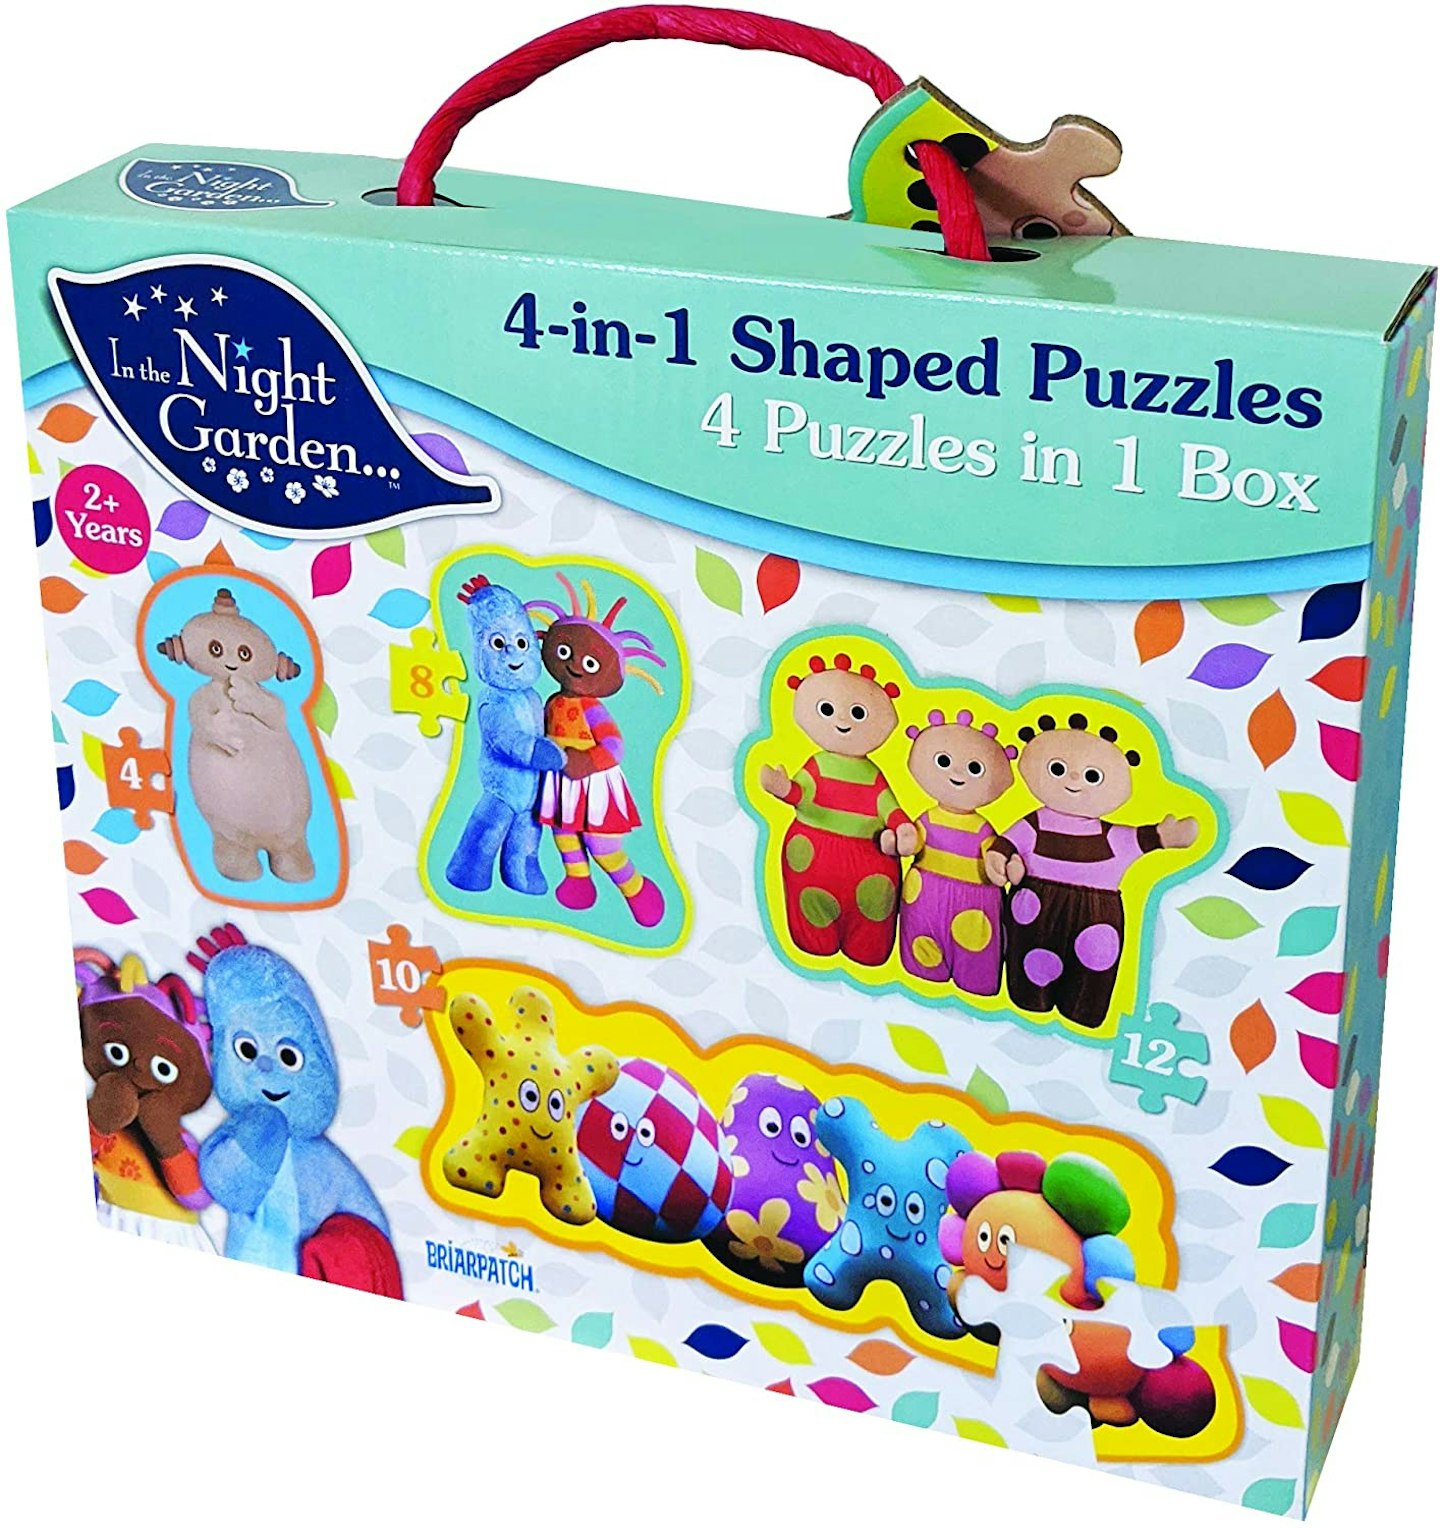 In the Night Garden 4 in 1 Puzzle Set